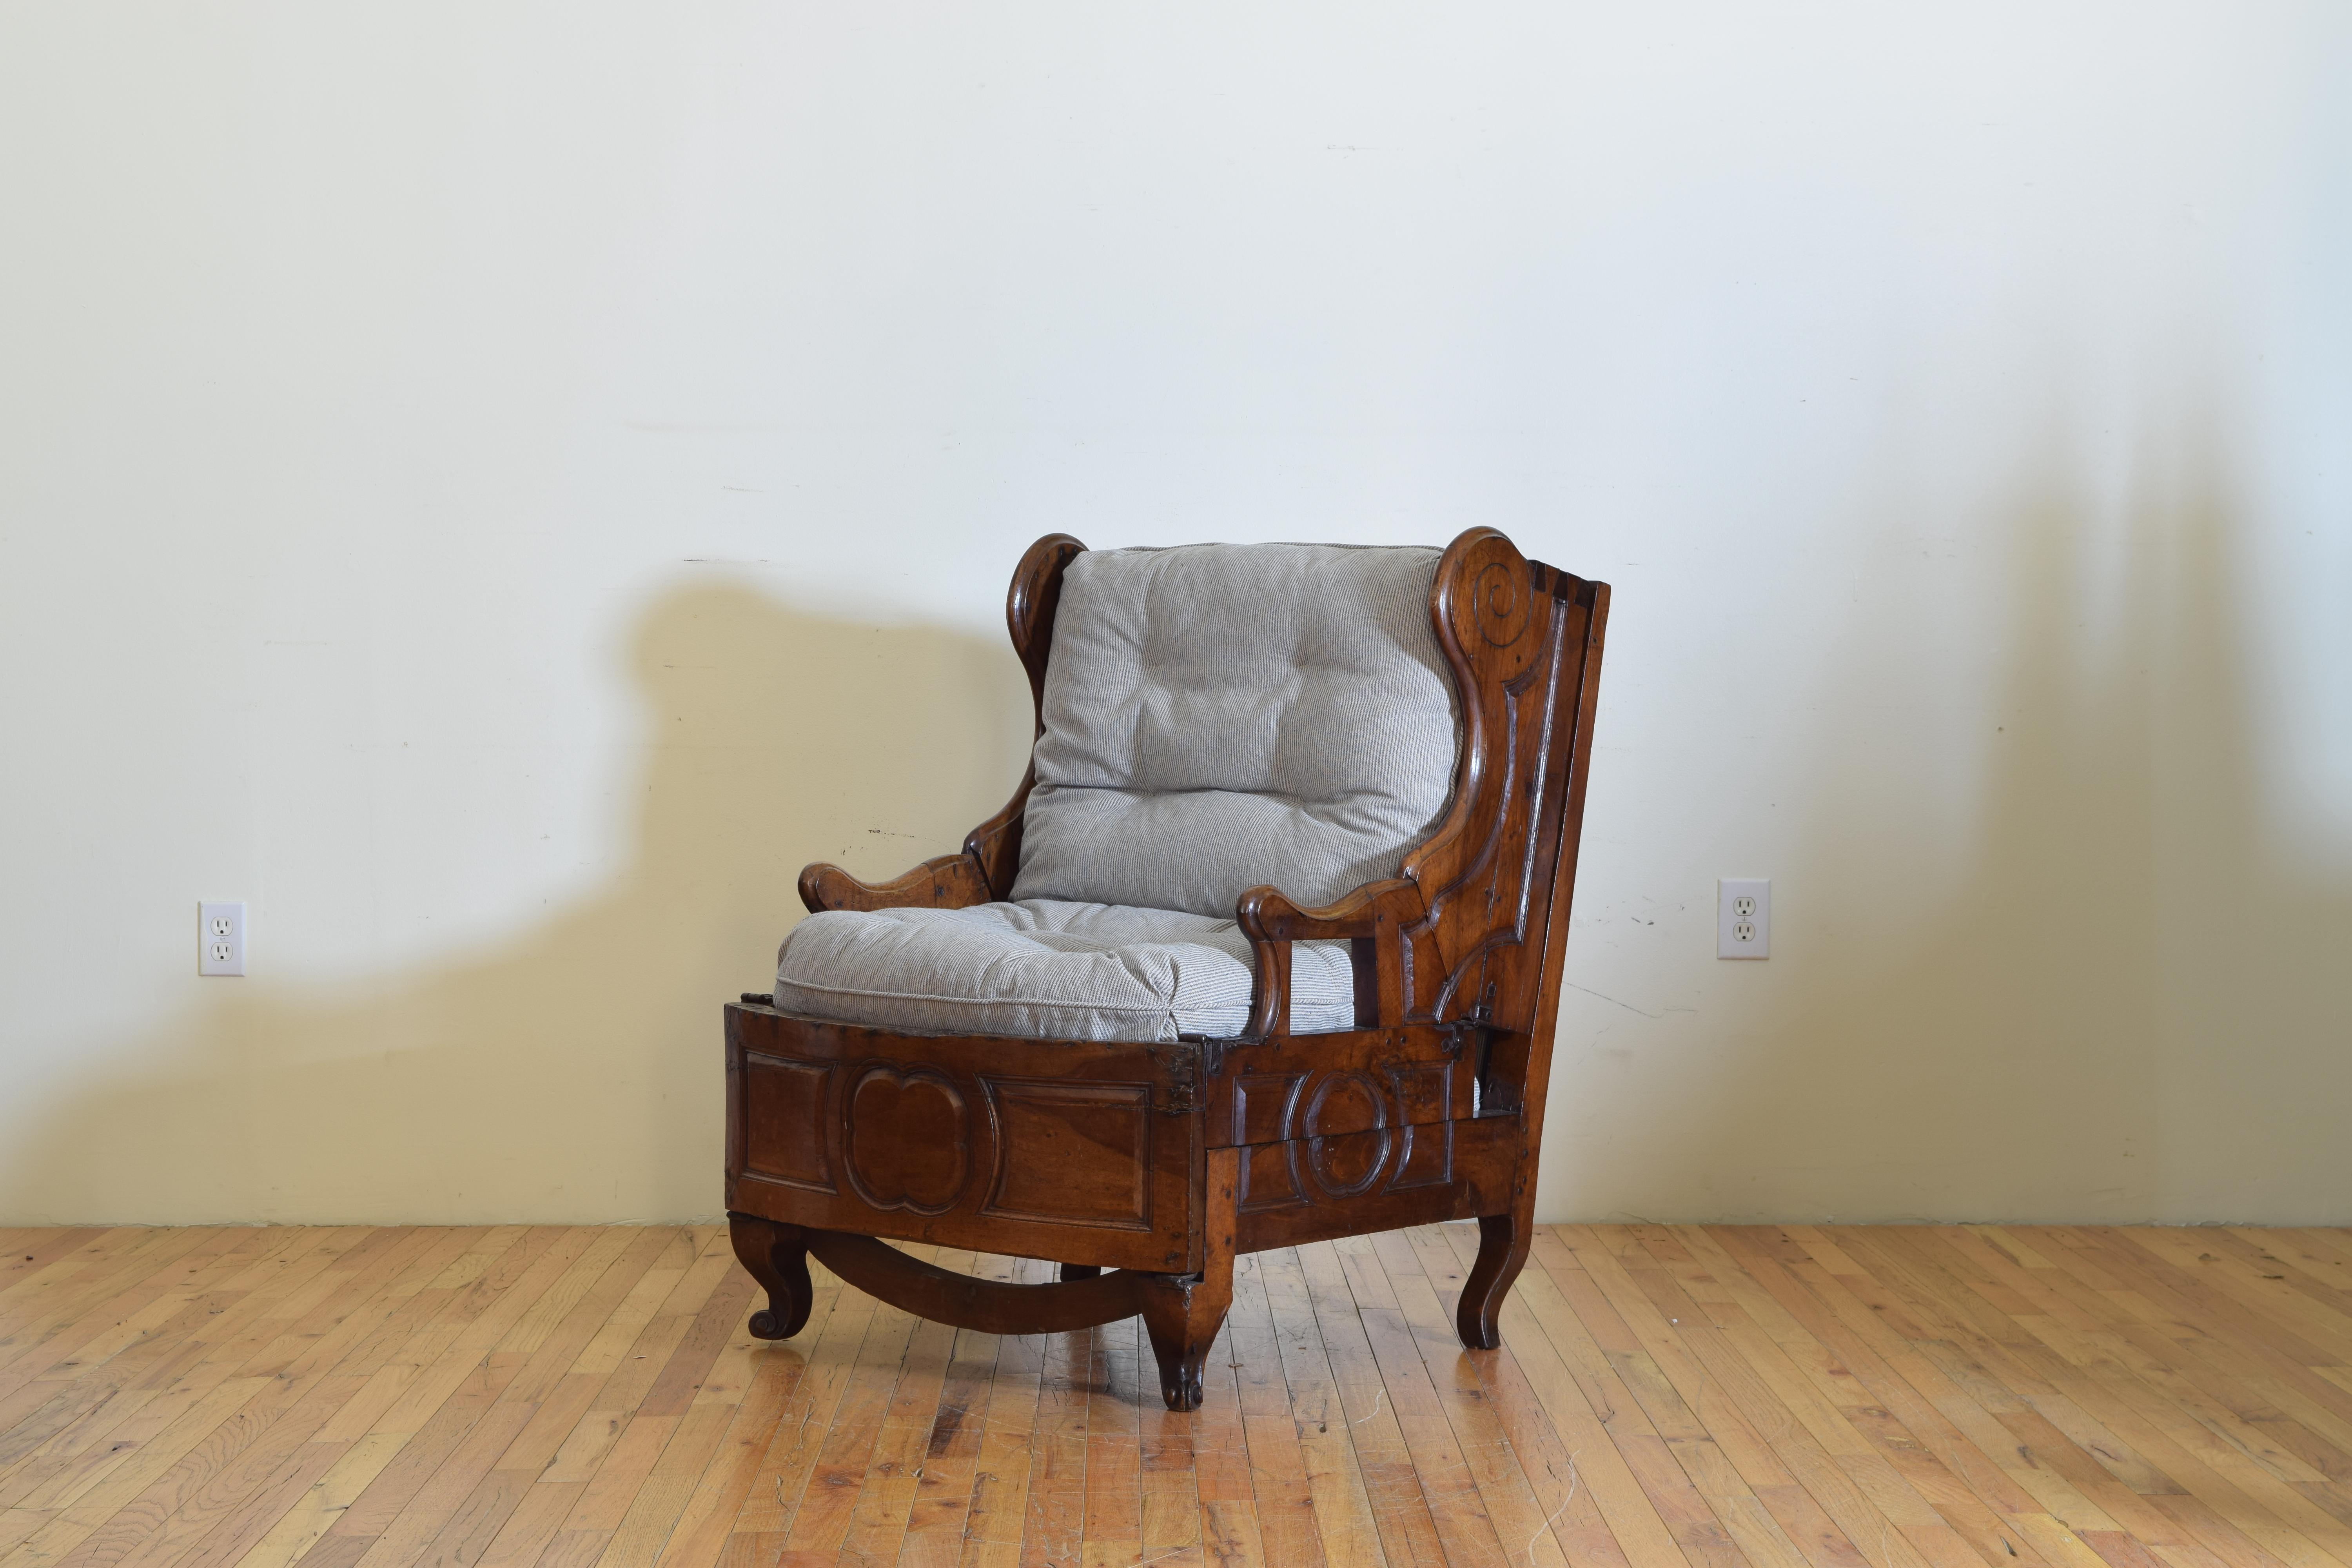 This large scale bergere/fauteuil hybrid has generous down filled cushions and folds down and over into a bed, with small carved handles and quatrefoil panels, and escargot feet.